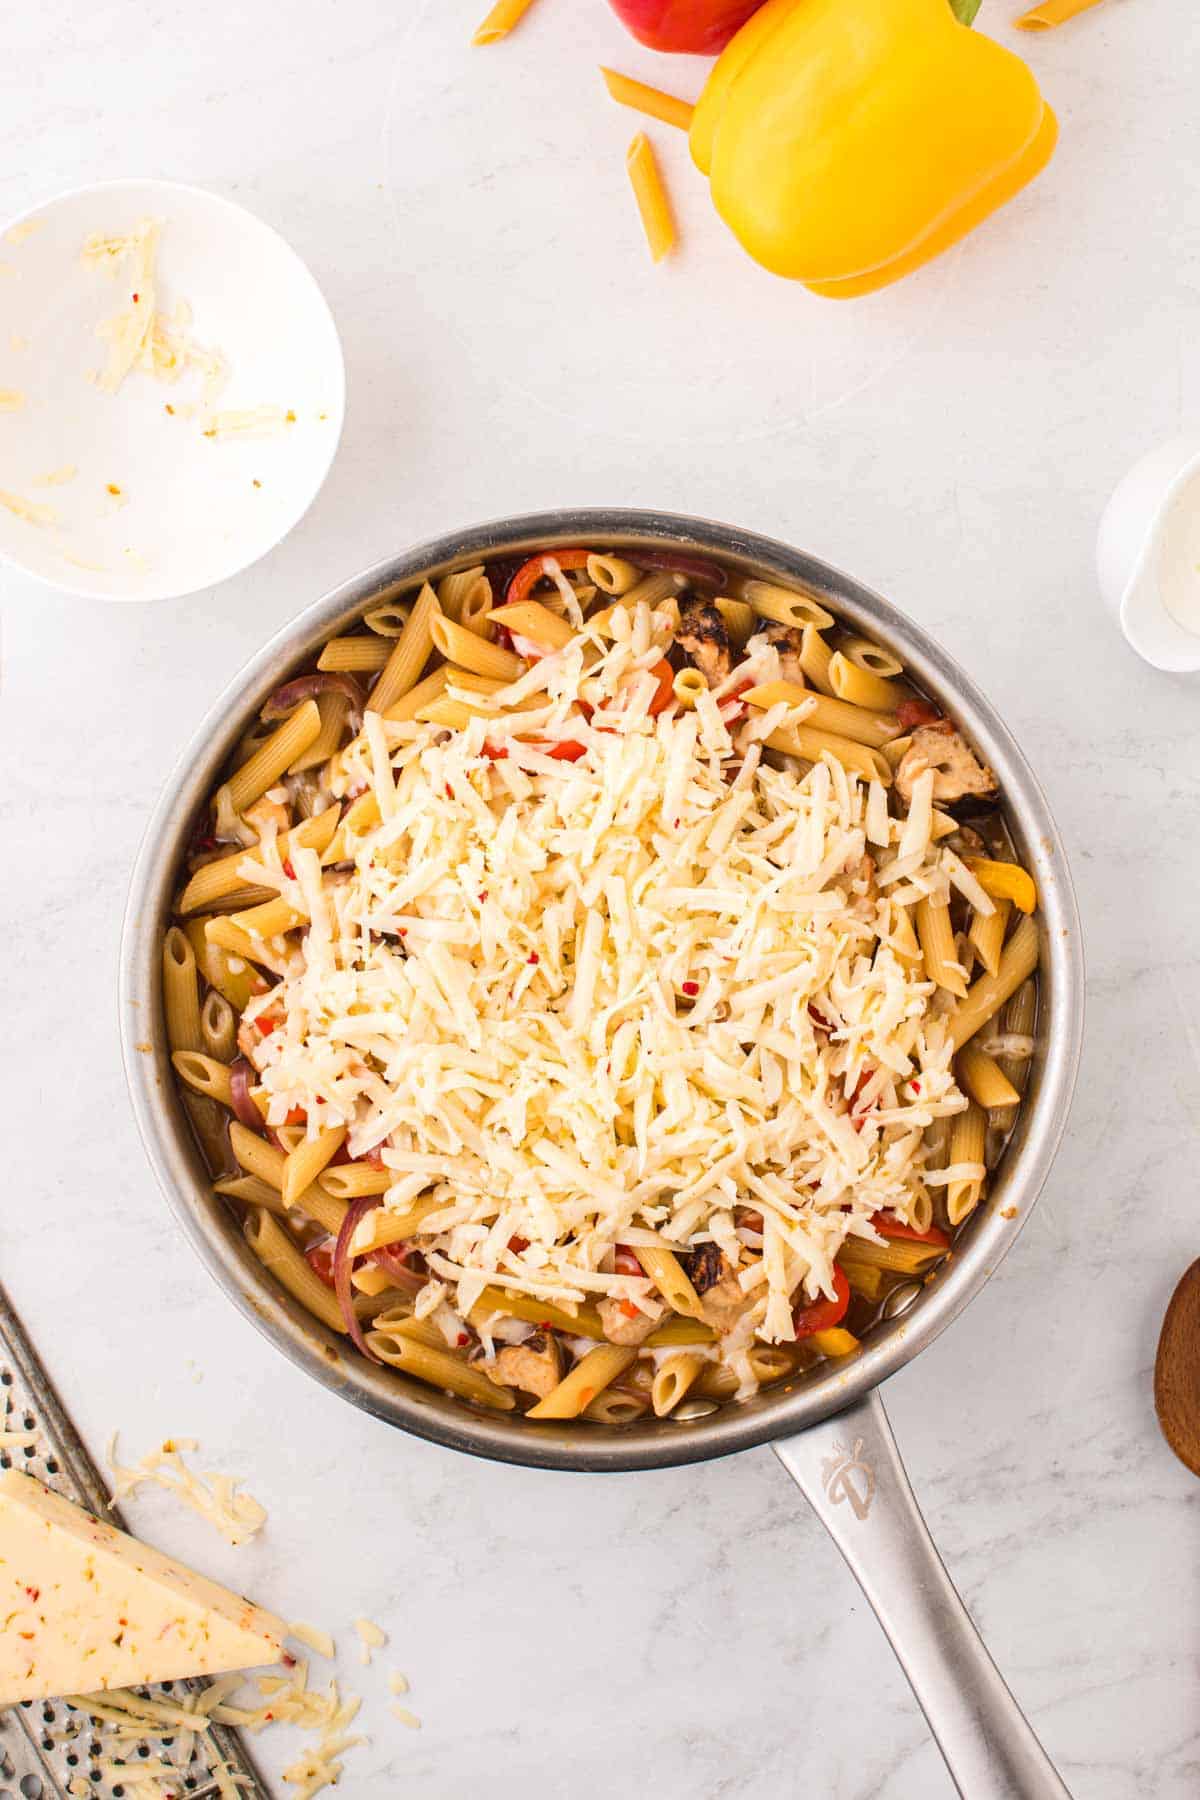 pepper jack cheese added to skillet with chicken penne pasta